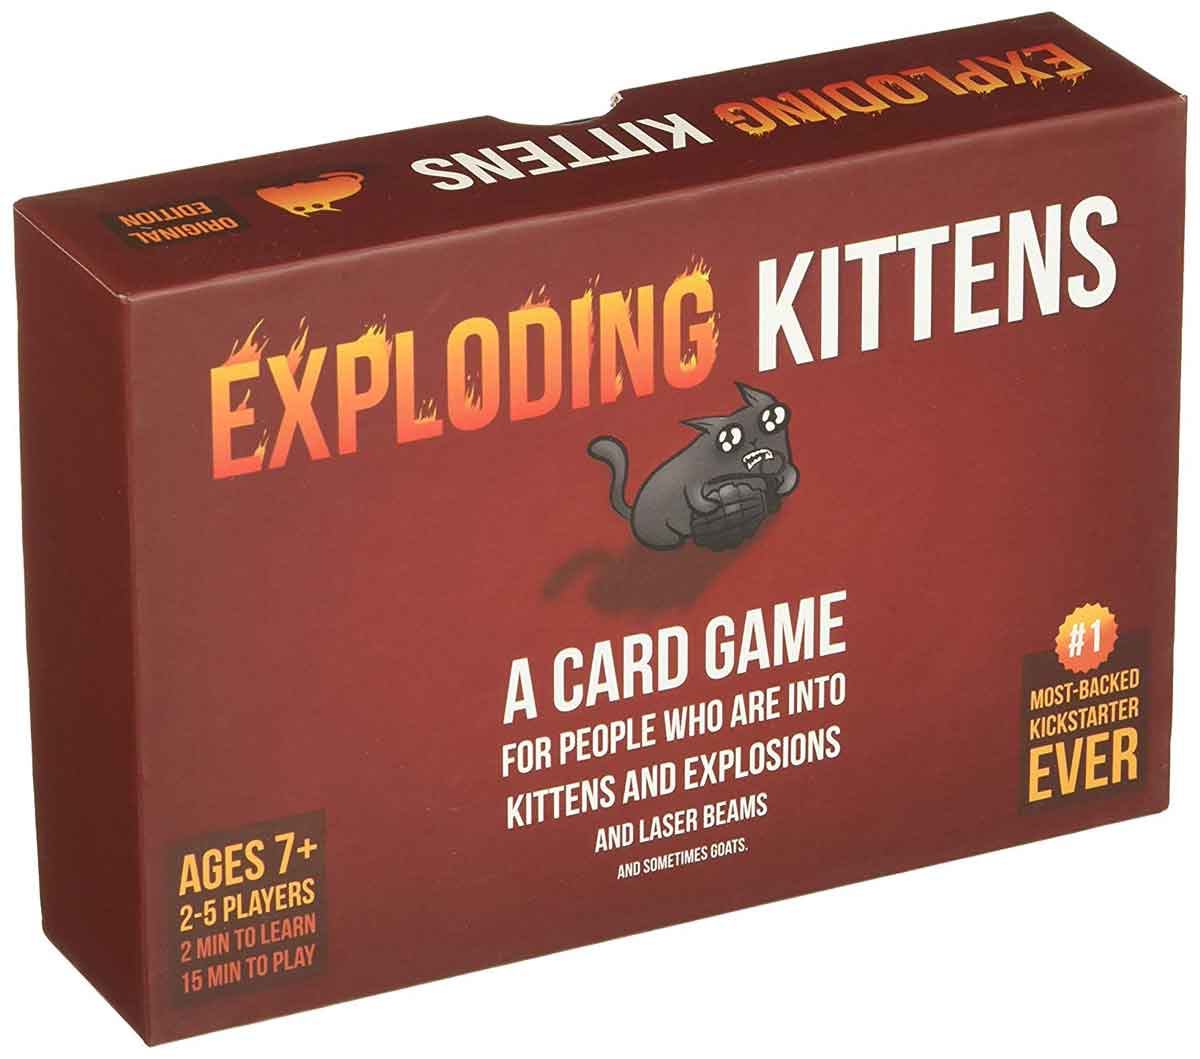 How to play Exploding Kittens and where to buy the world’s best board game